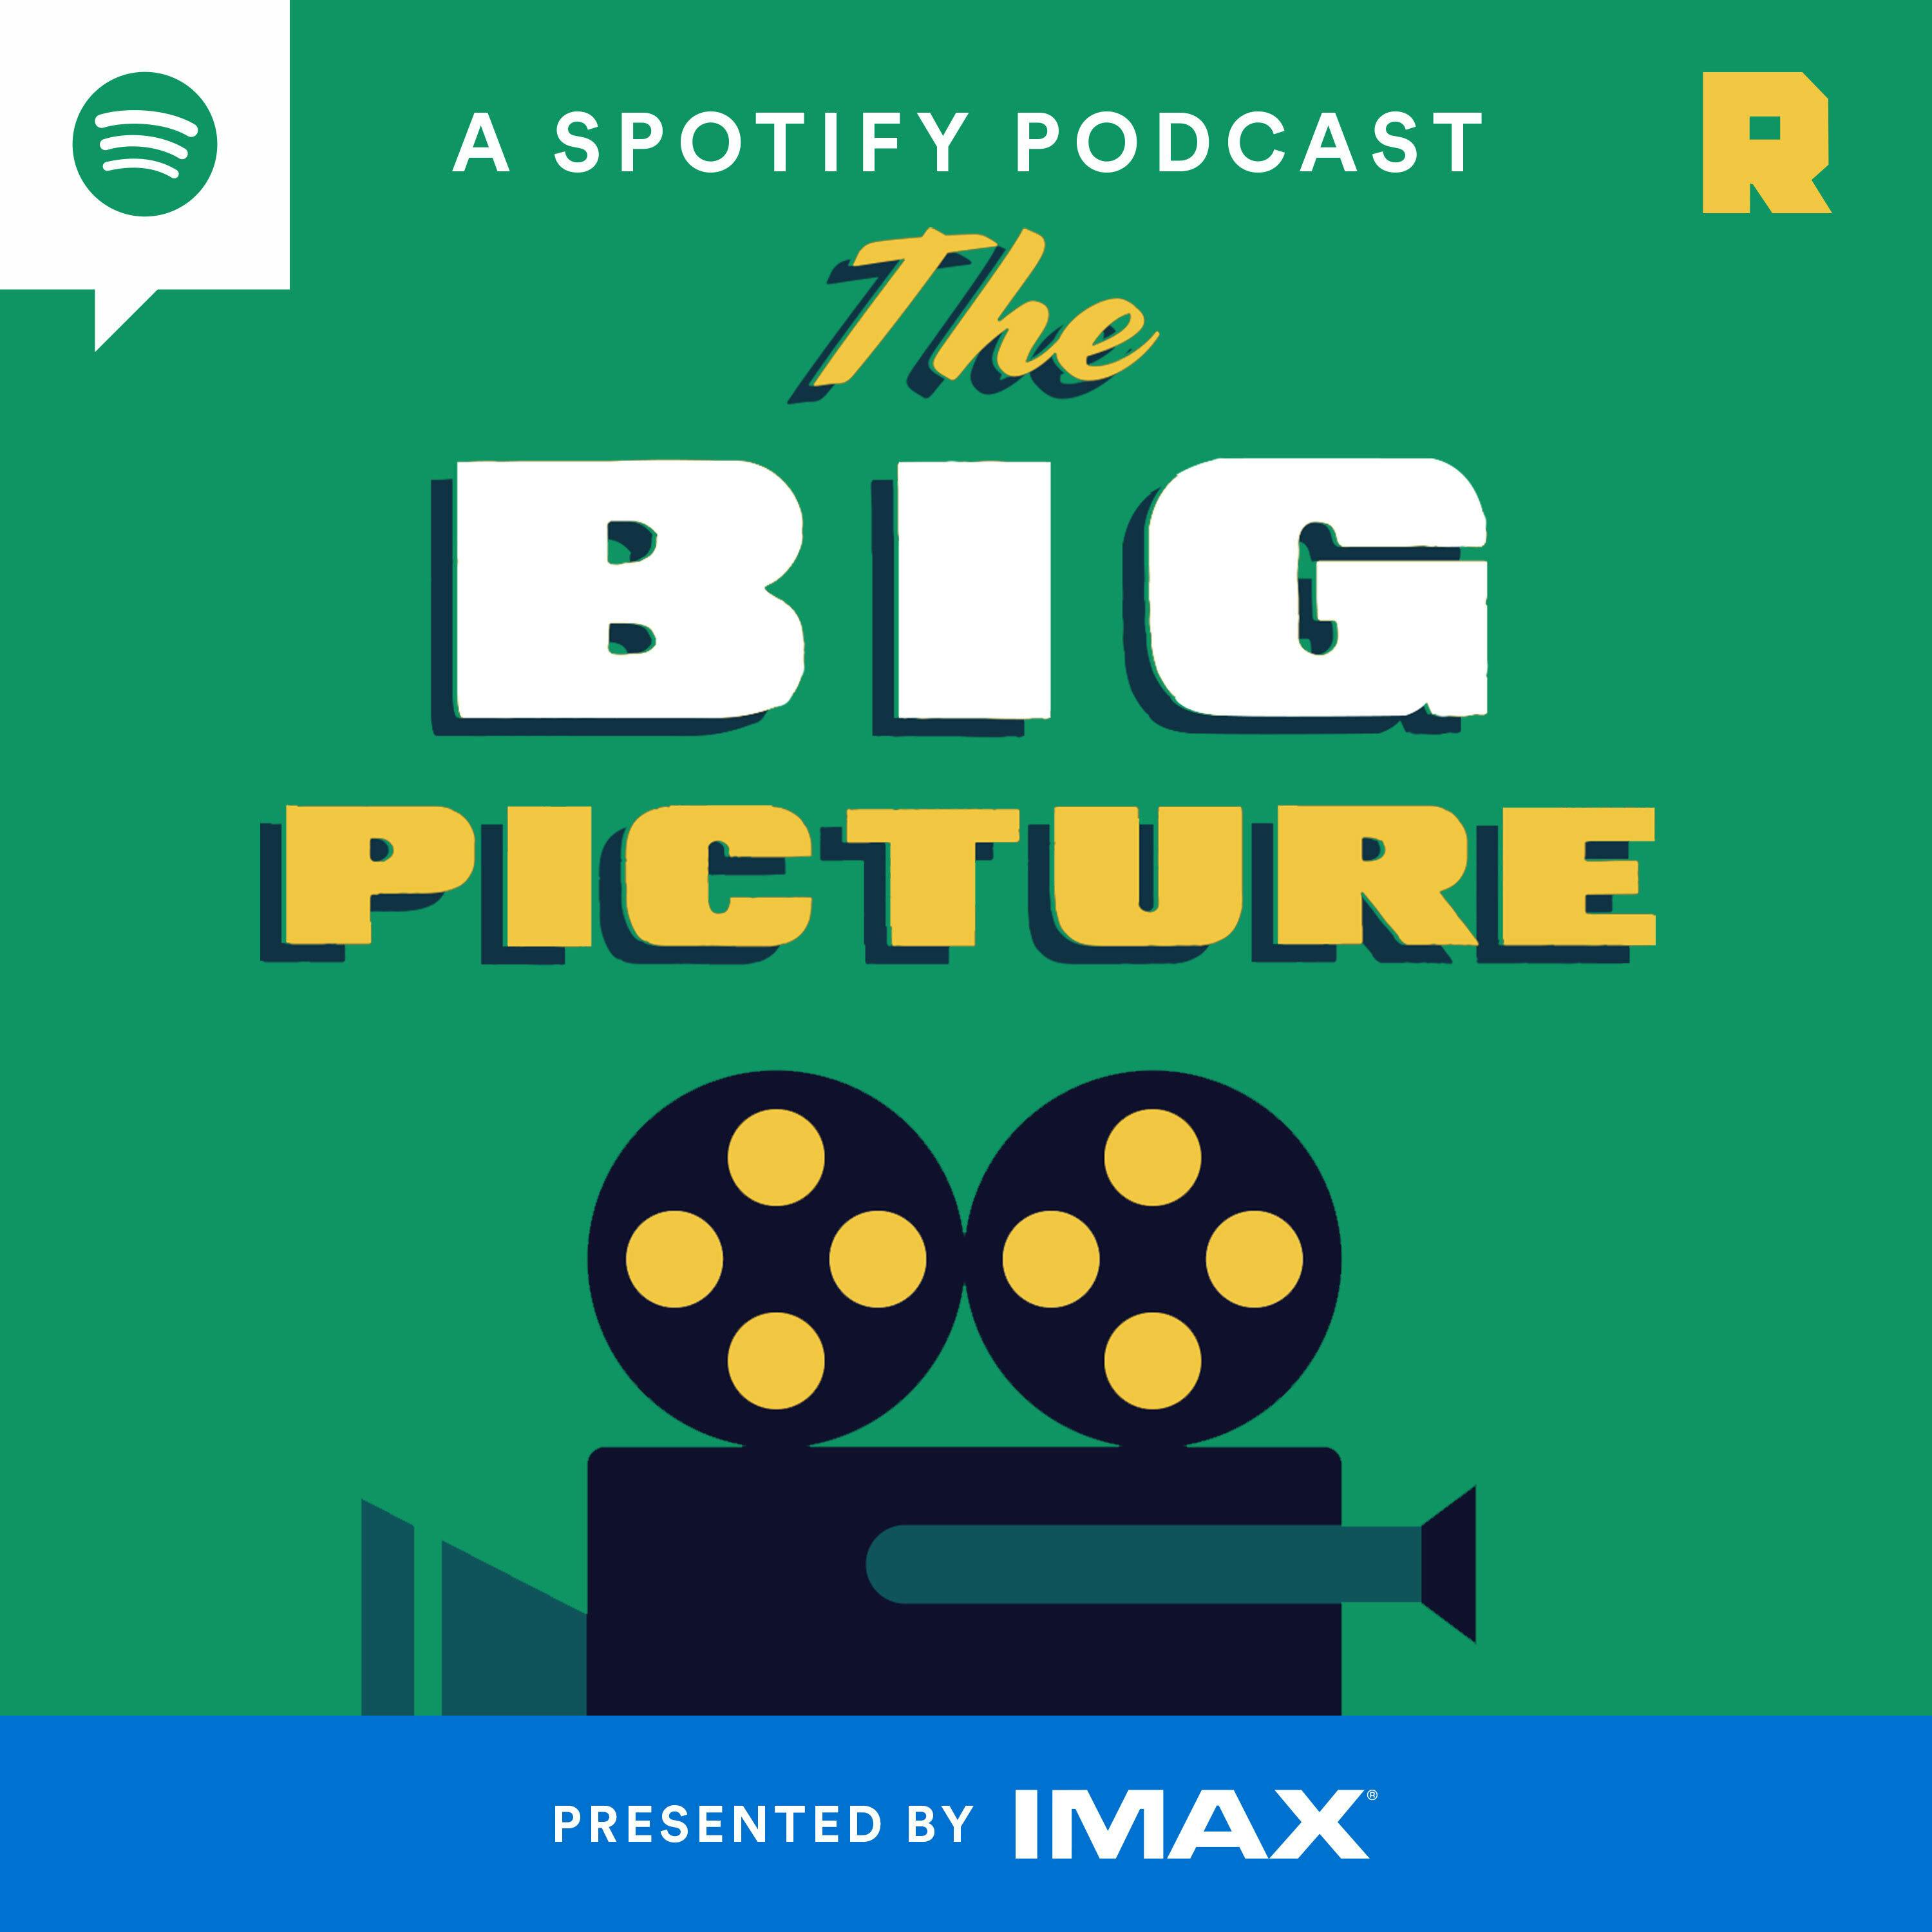 The Big Picture podcast